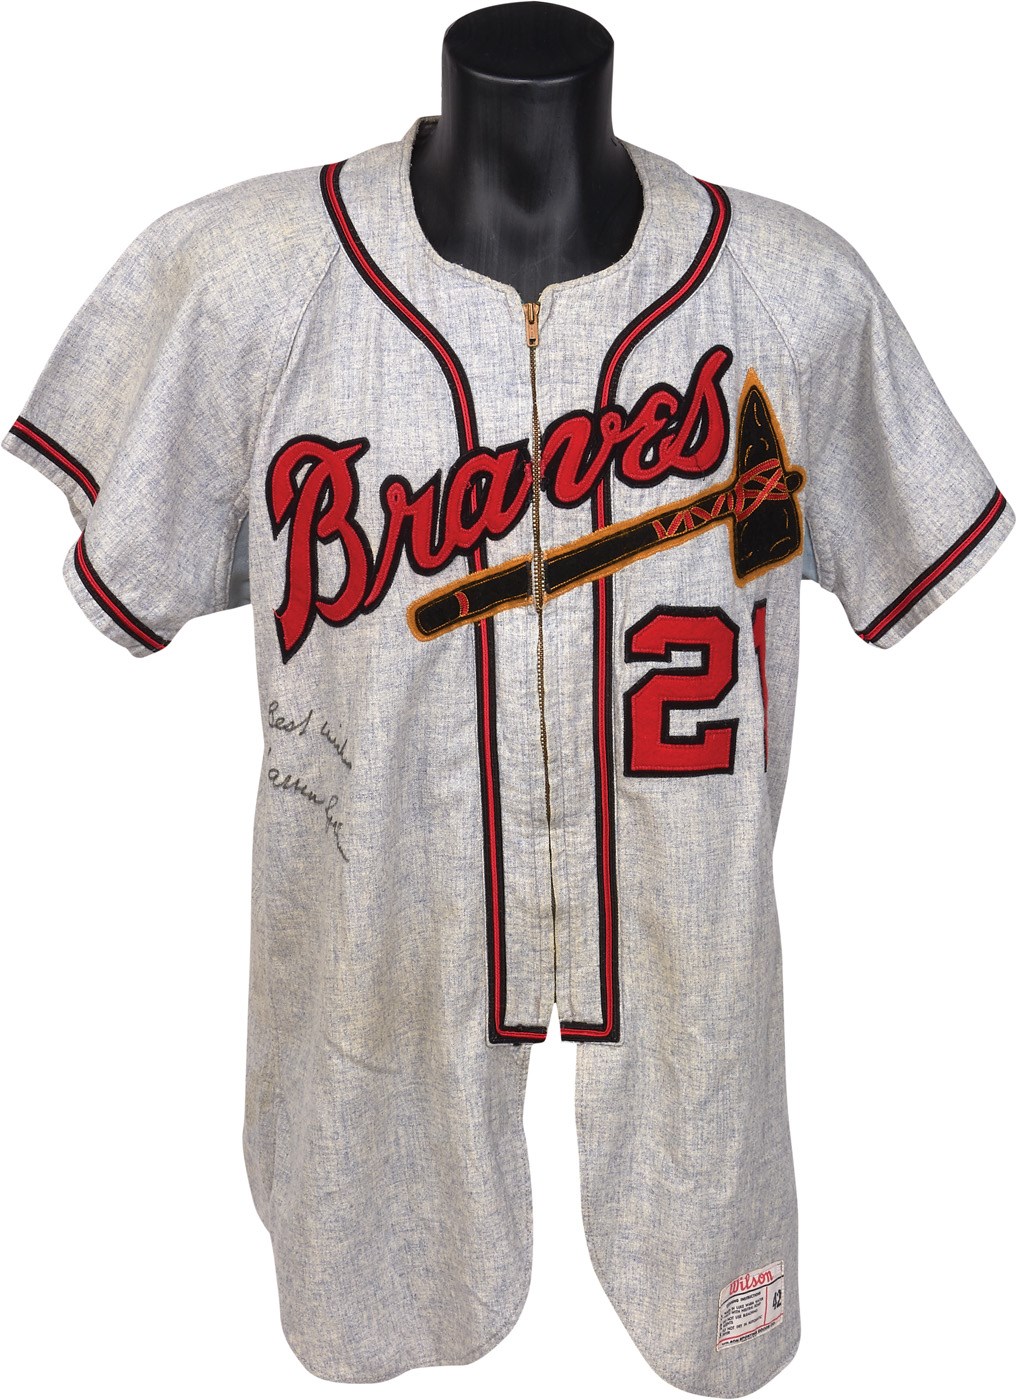 - 1962 Warren Spahn Milwaukee Braves Game Worn Jersey with LOA from Spahn (MEARS 9.5)